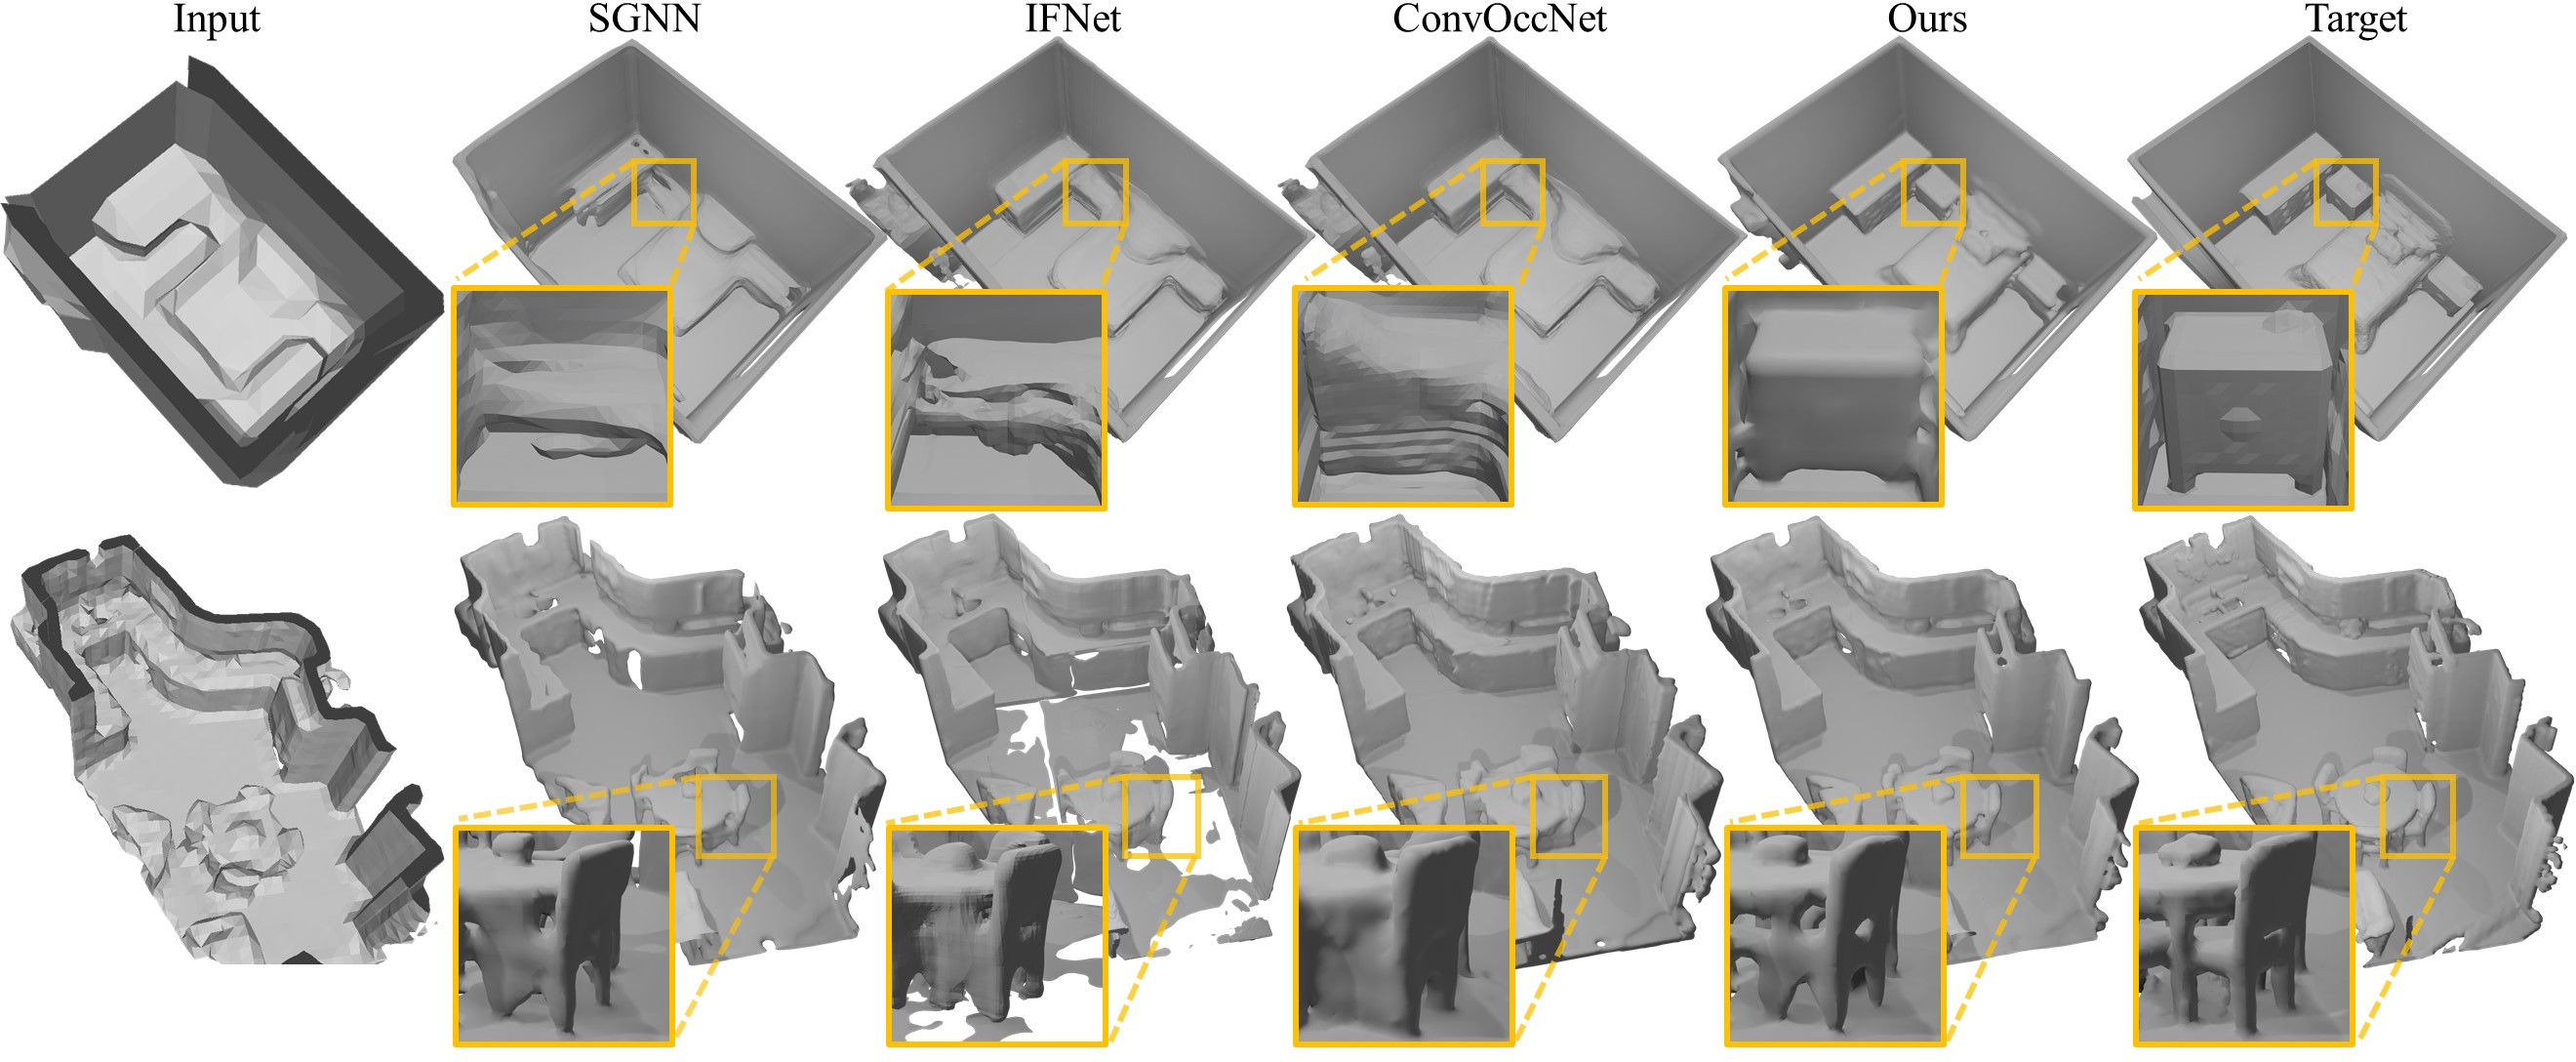 Results (3D super-resolution)|3D super resolution on 3DFront (top) and Matterport3D (bottom) datasets. In contrast to other approaches, our method generates more coherent 3D geometry with sharper details.